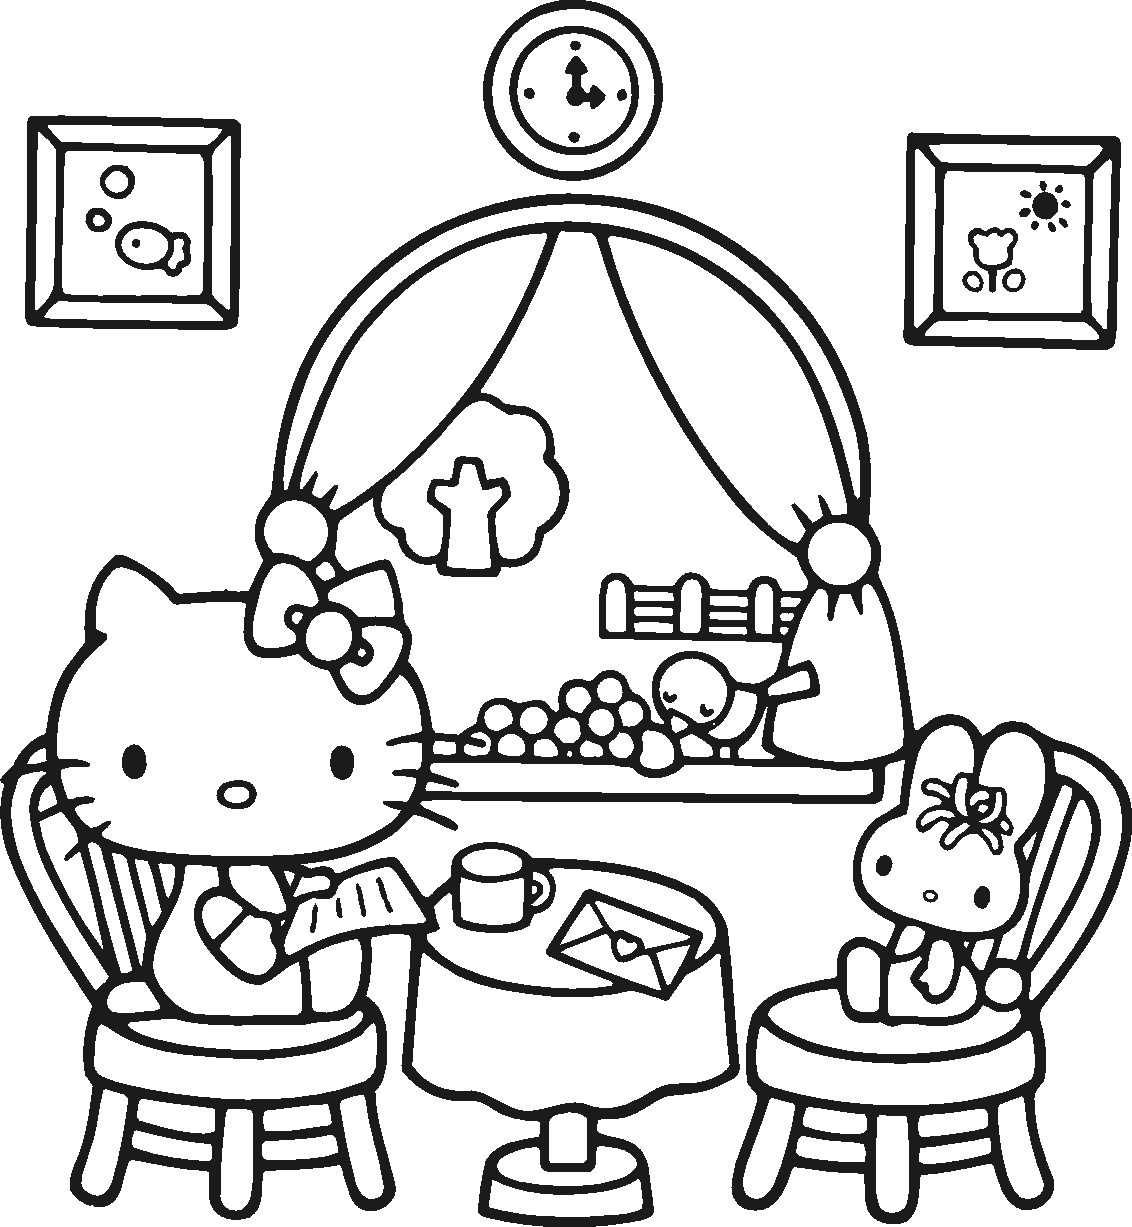 free-printable-hello-kitty-coloring-pages-for-kids